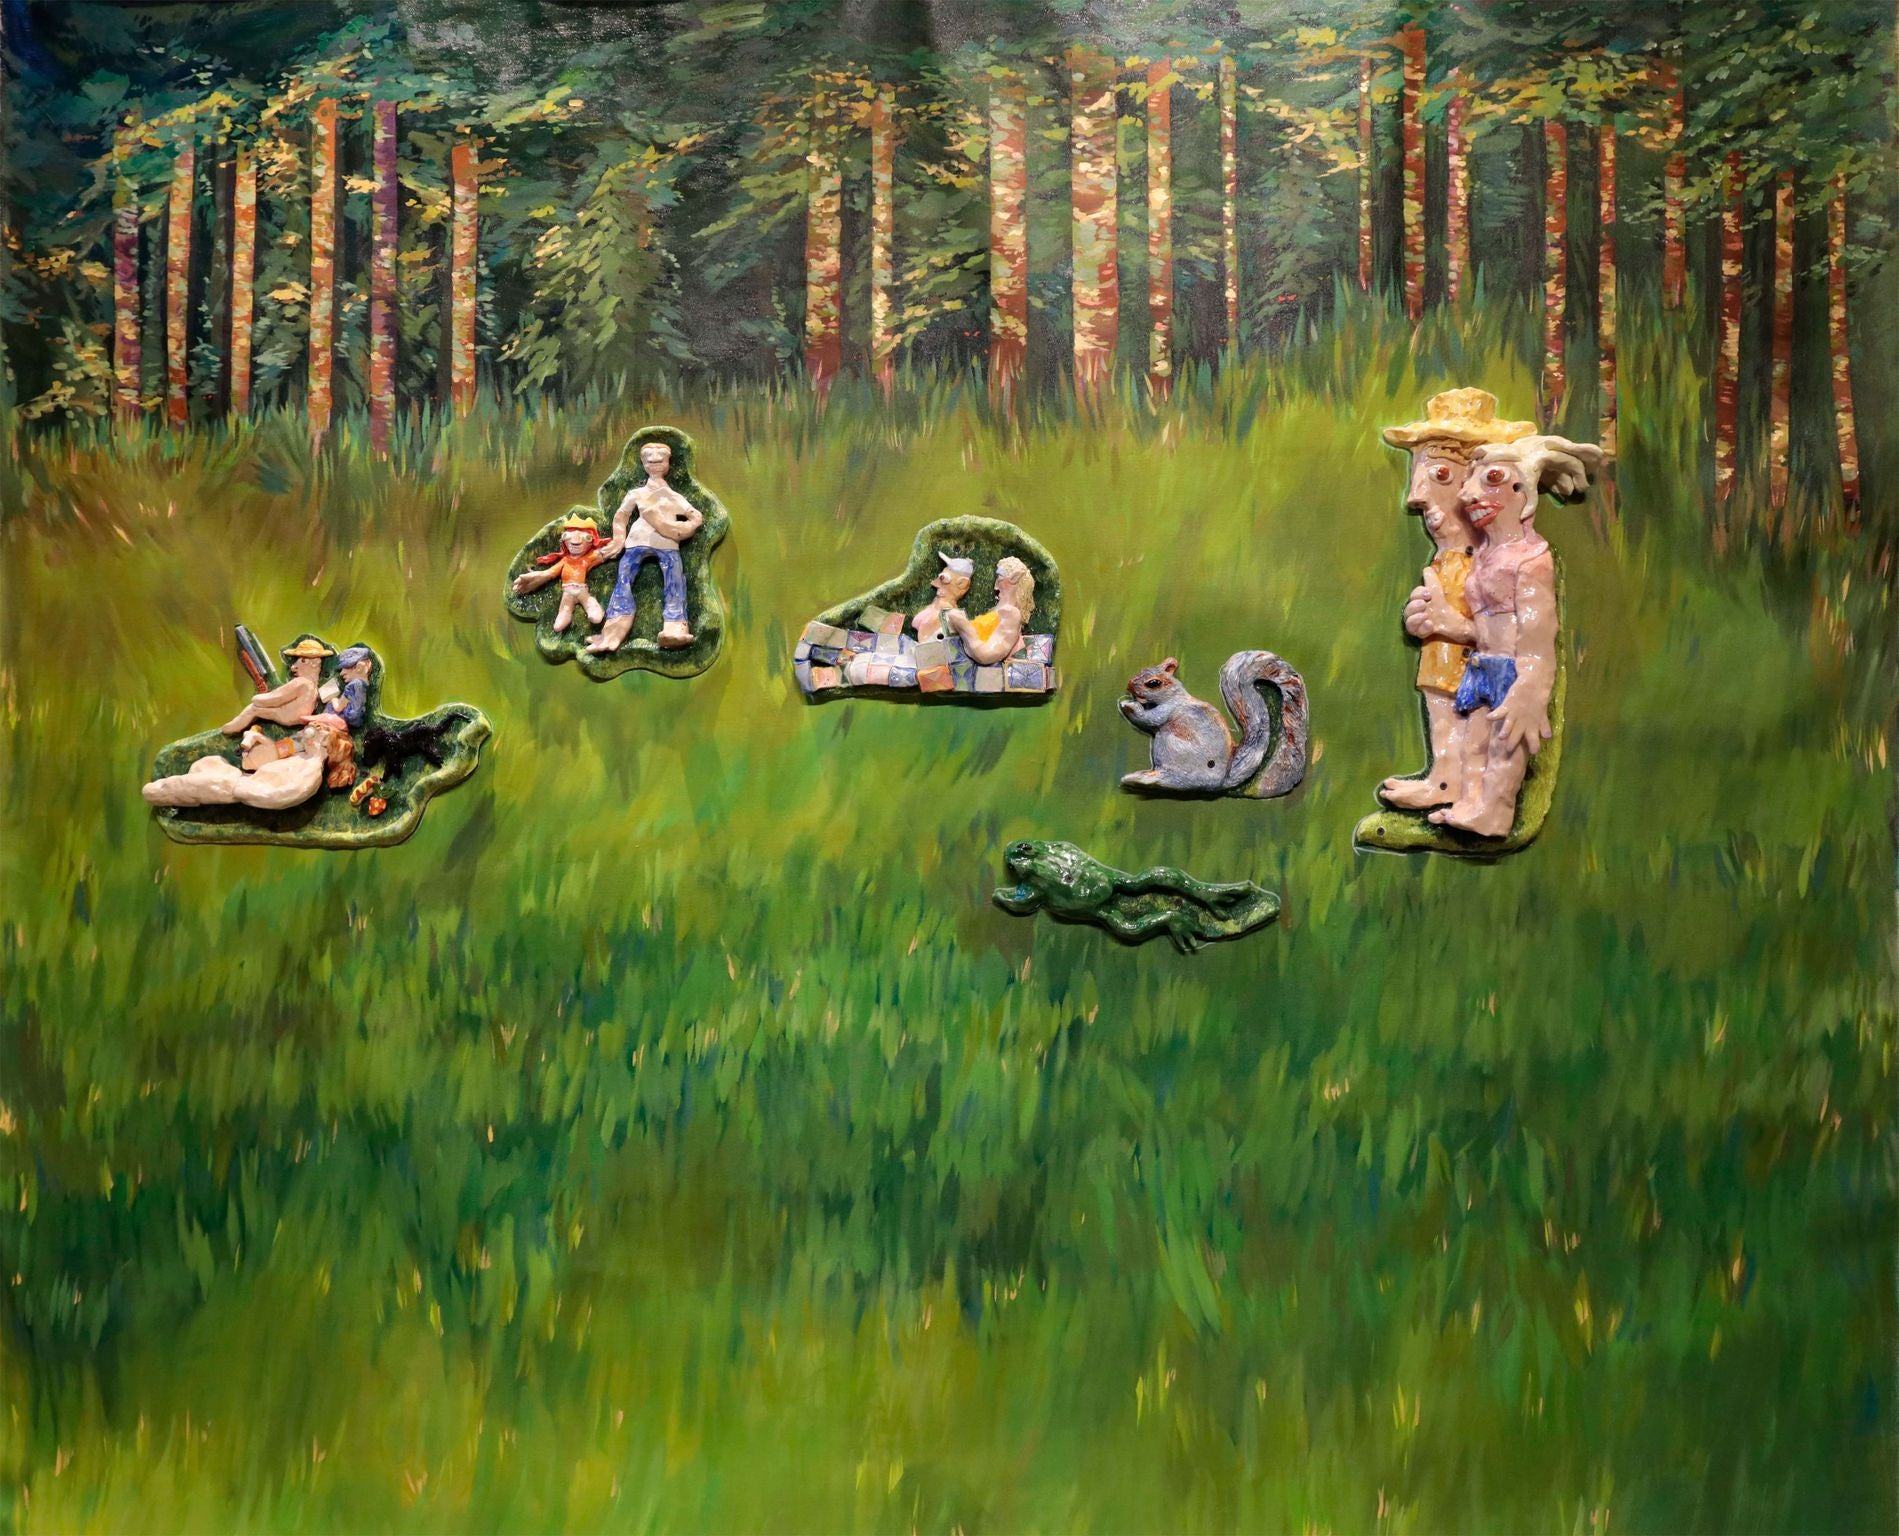 Taylor Lee Nicholson, "A Sunday Afternoon in the Trailer Park (after Seurat)"